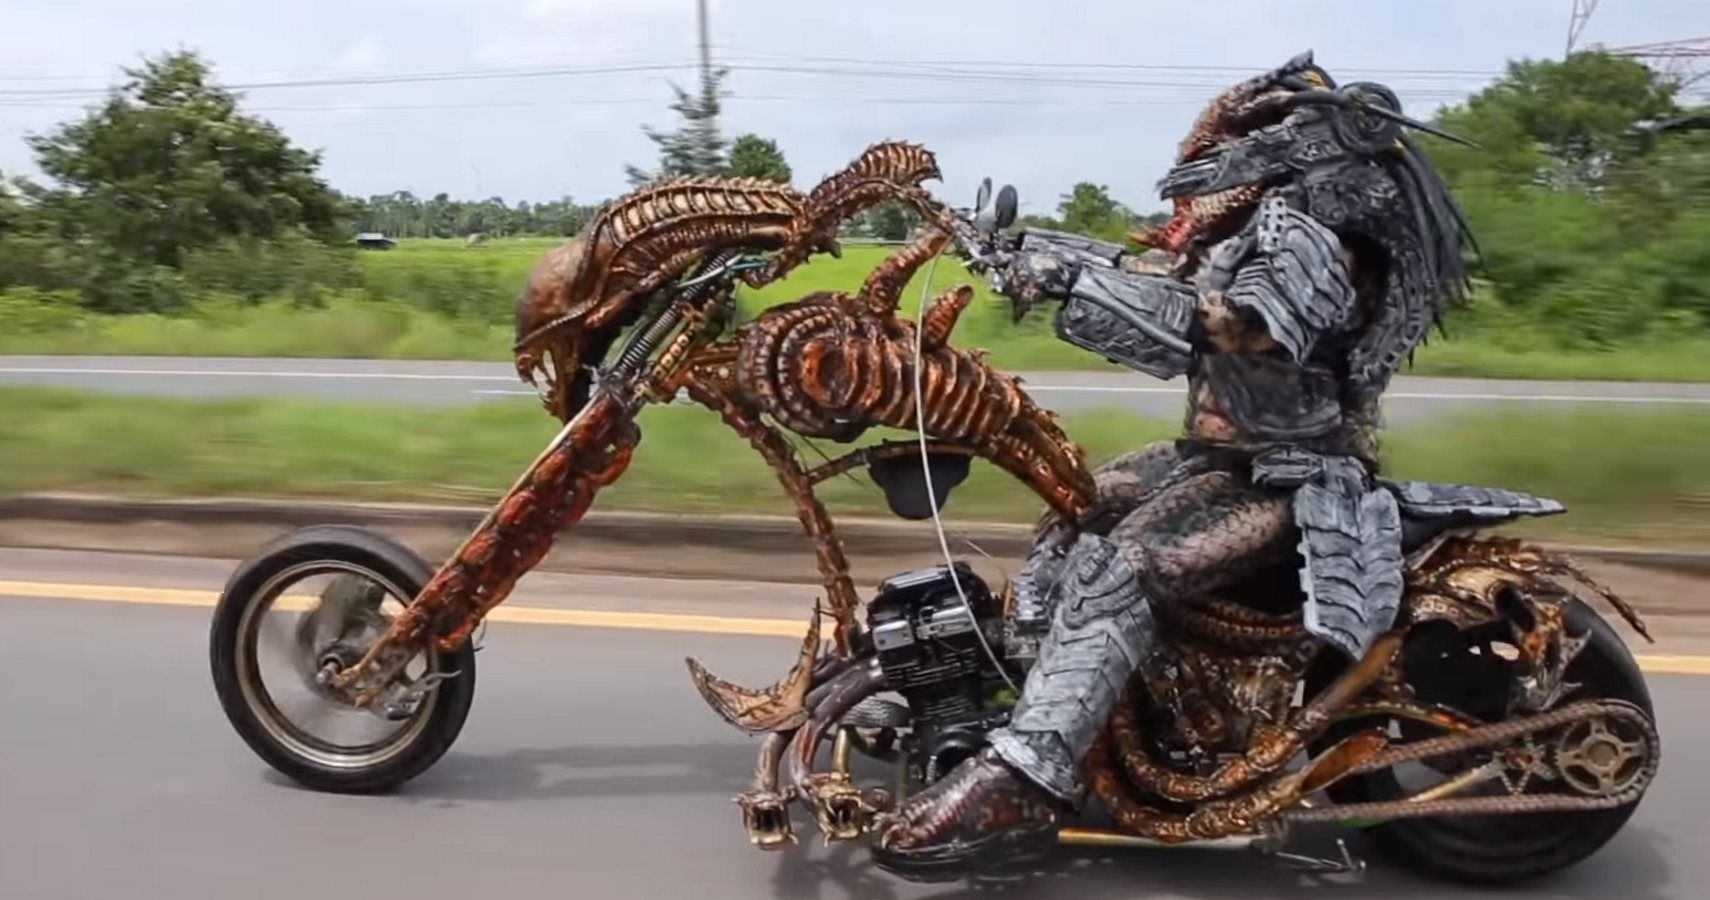 Check Out This 'Alien' Themed Motorcycle Driven By Predator